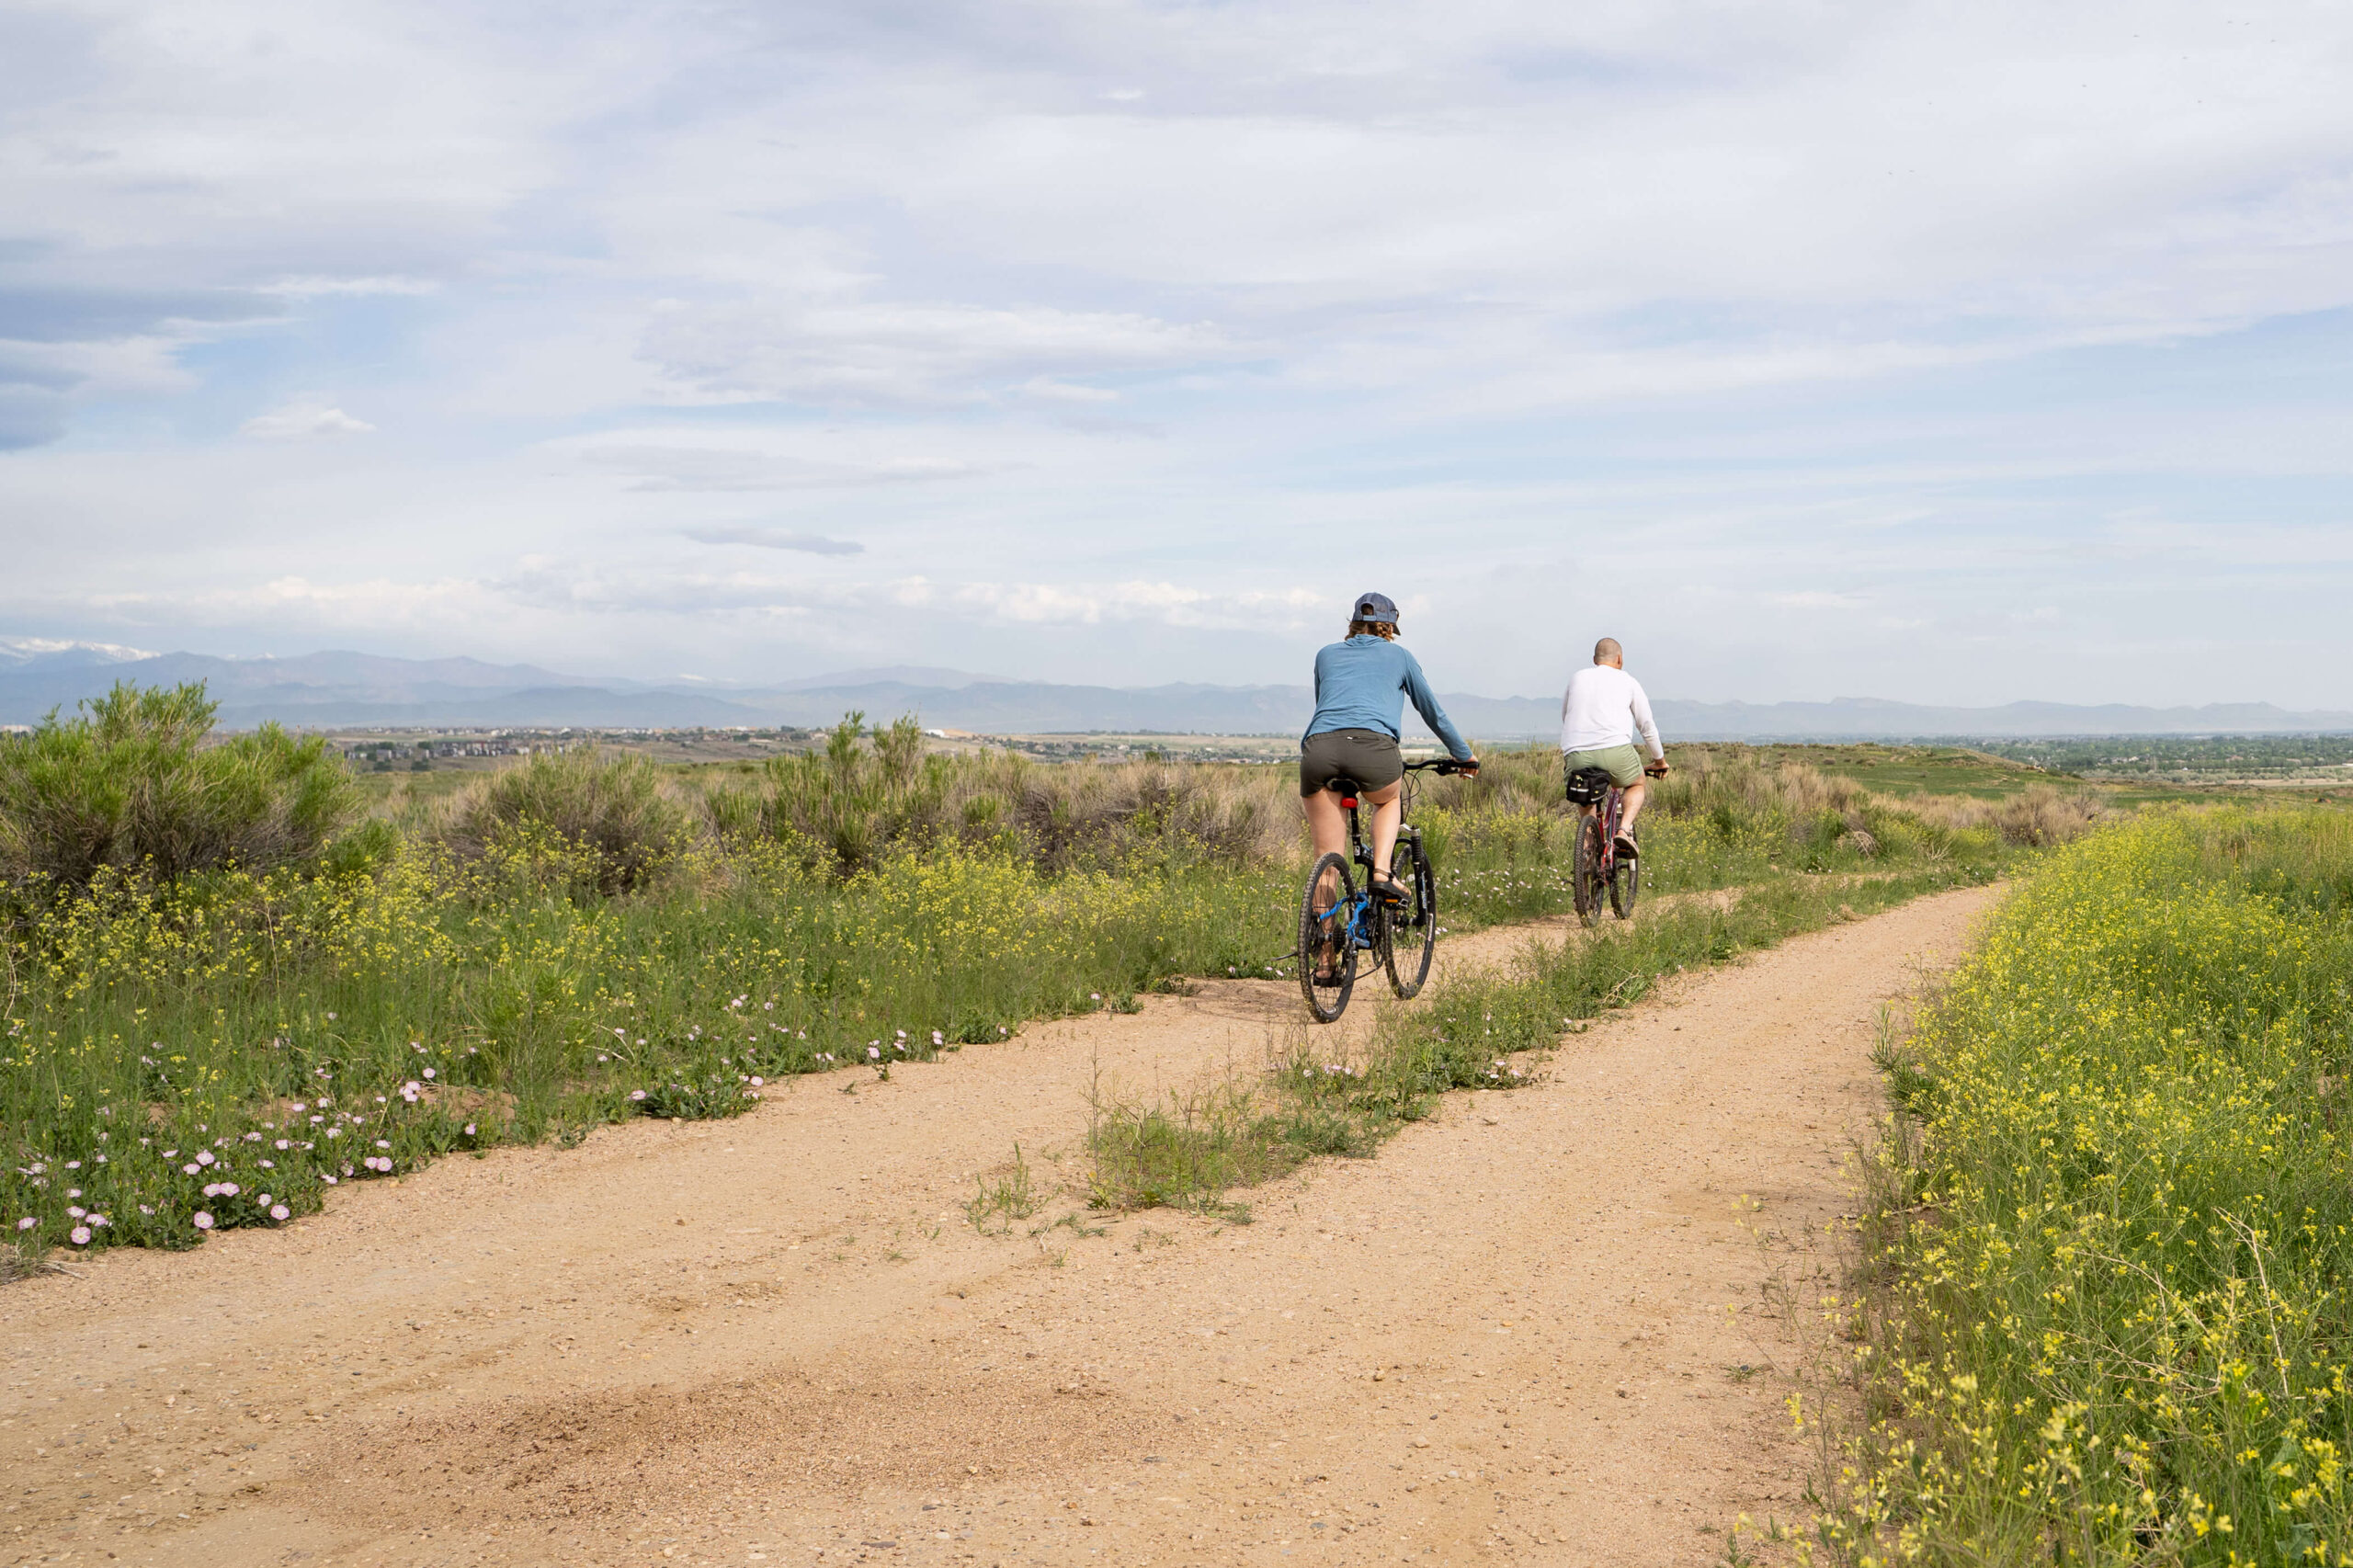 Mountain bikers on the trail at Shur View park in Greeley, CO